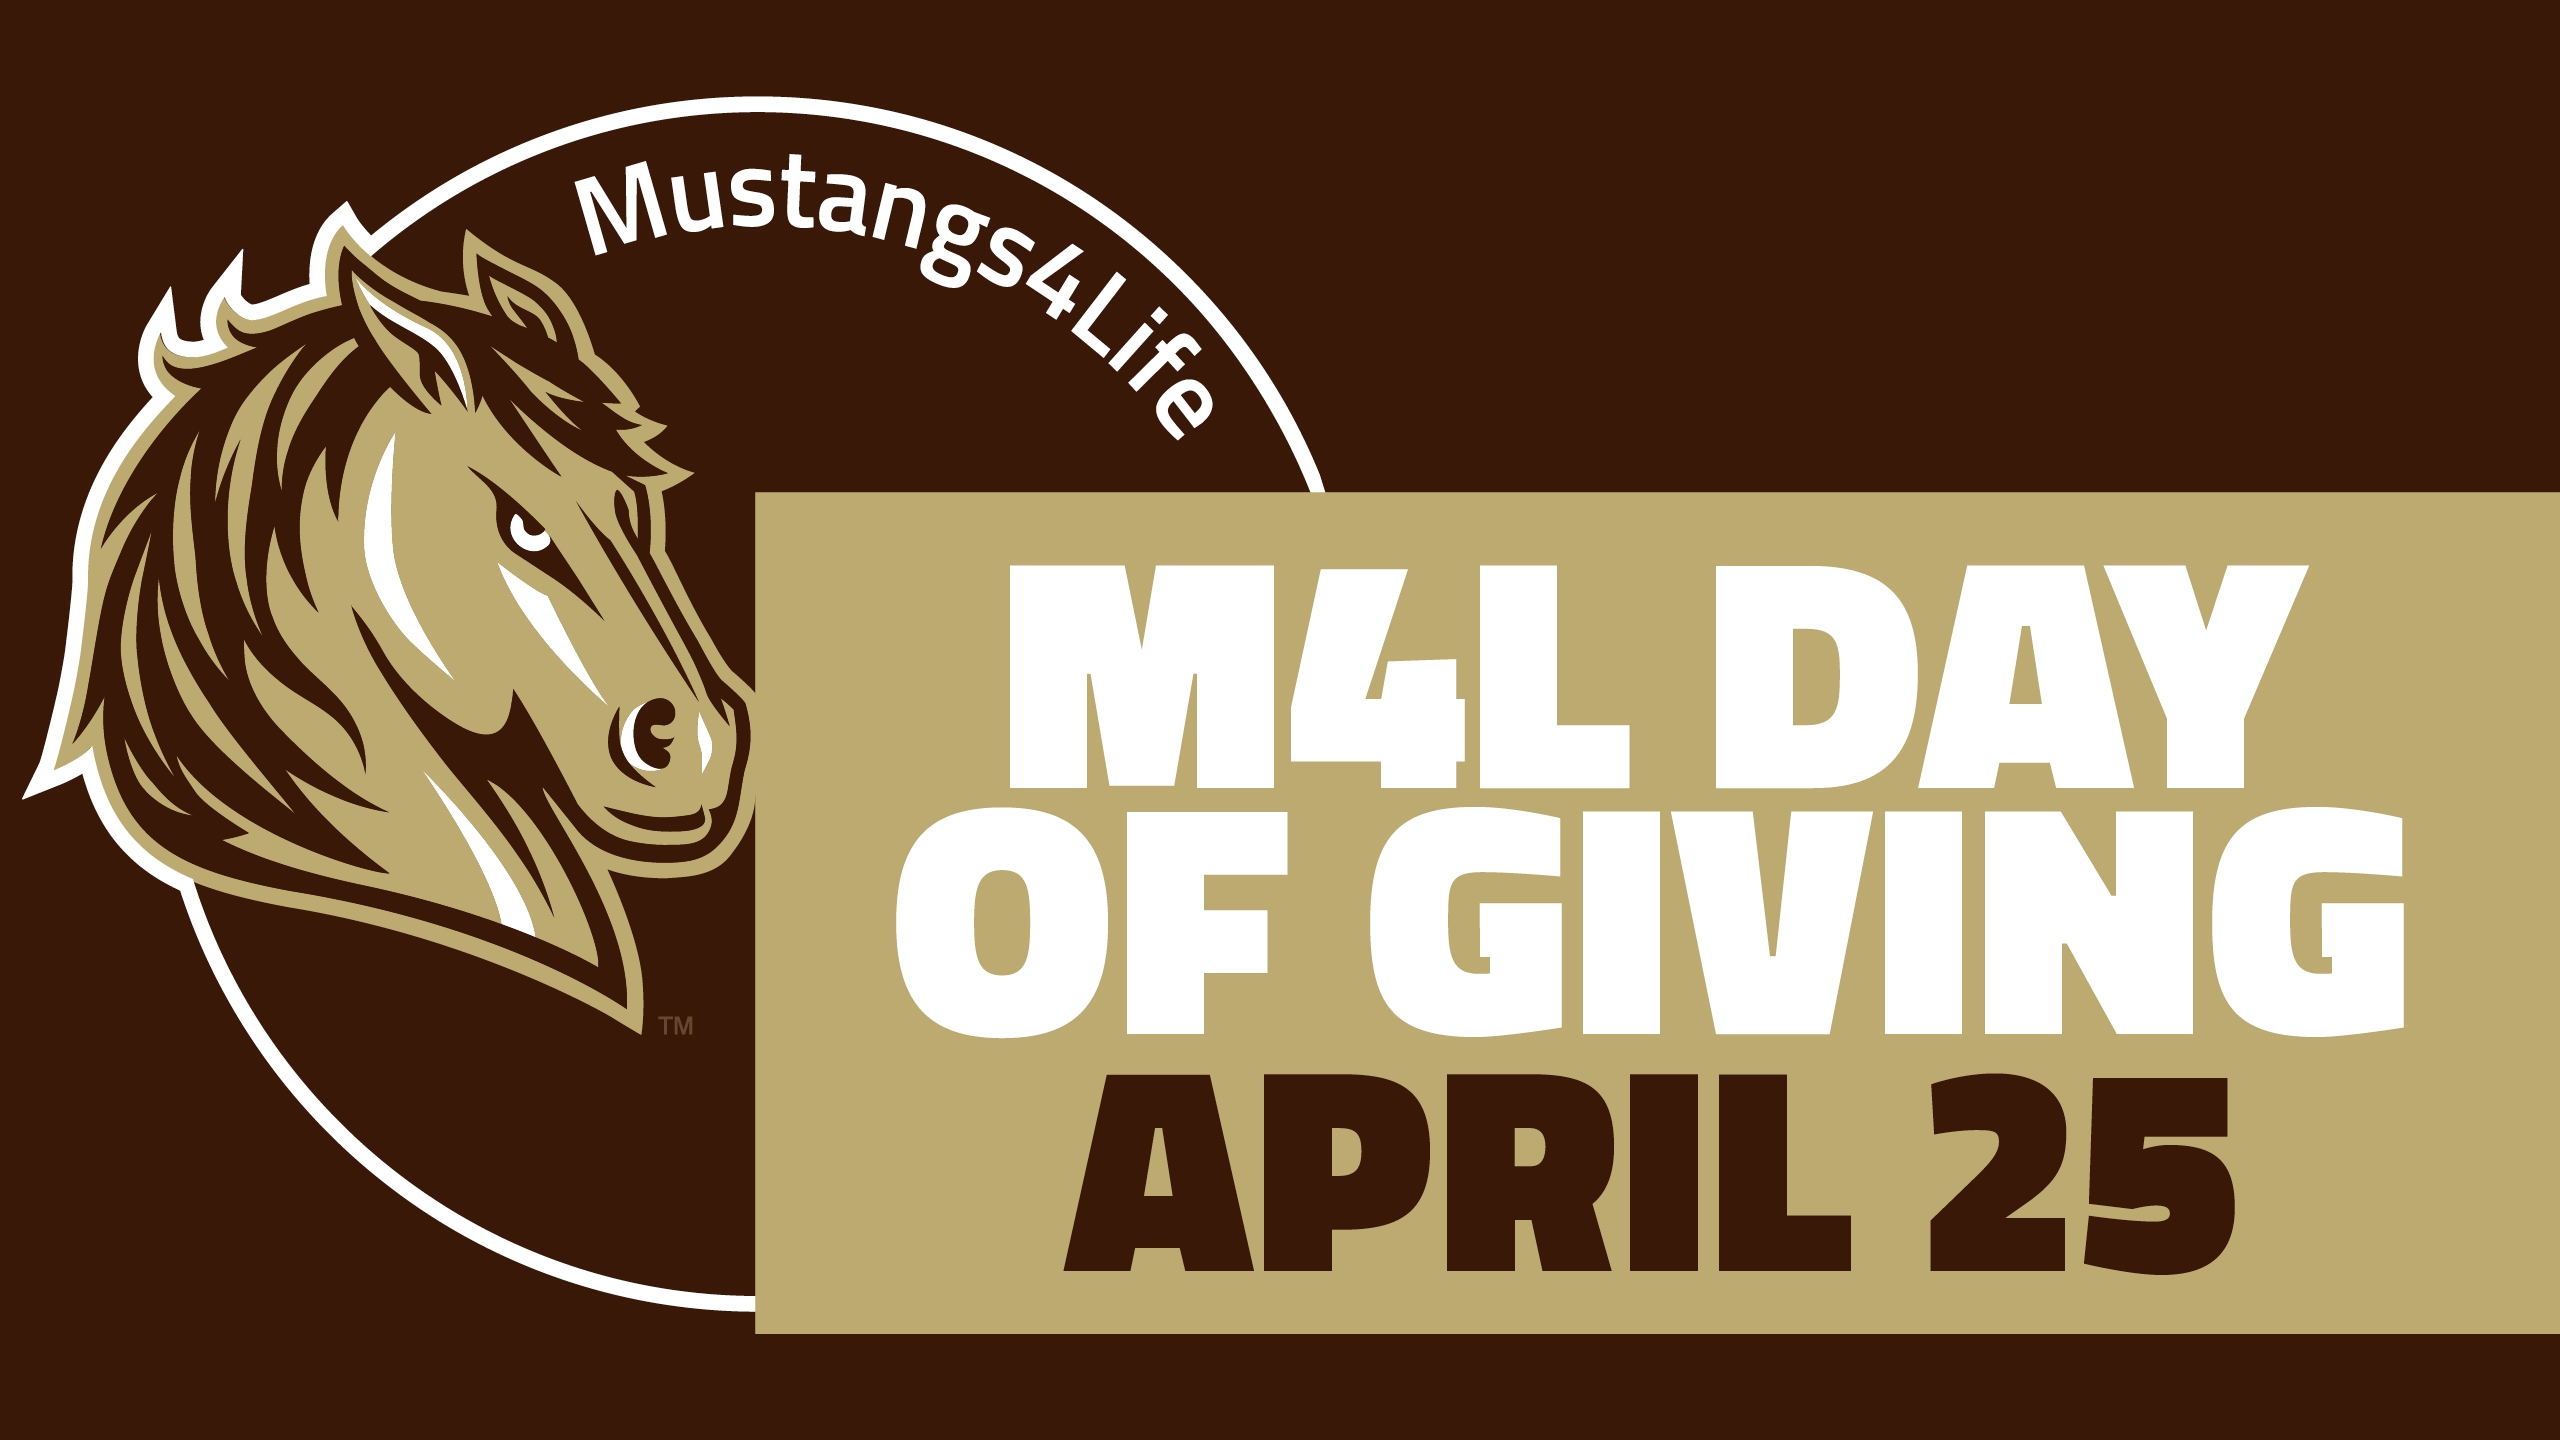 3rd Annual M4L Day of Giving is April 25